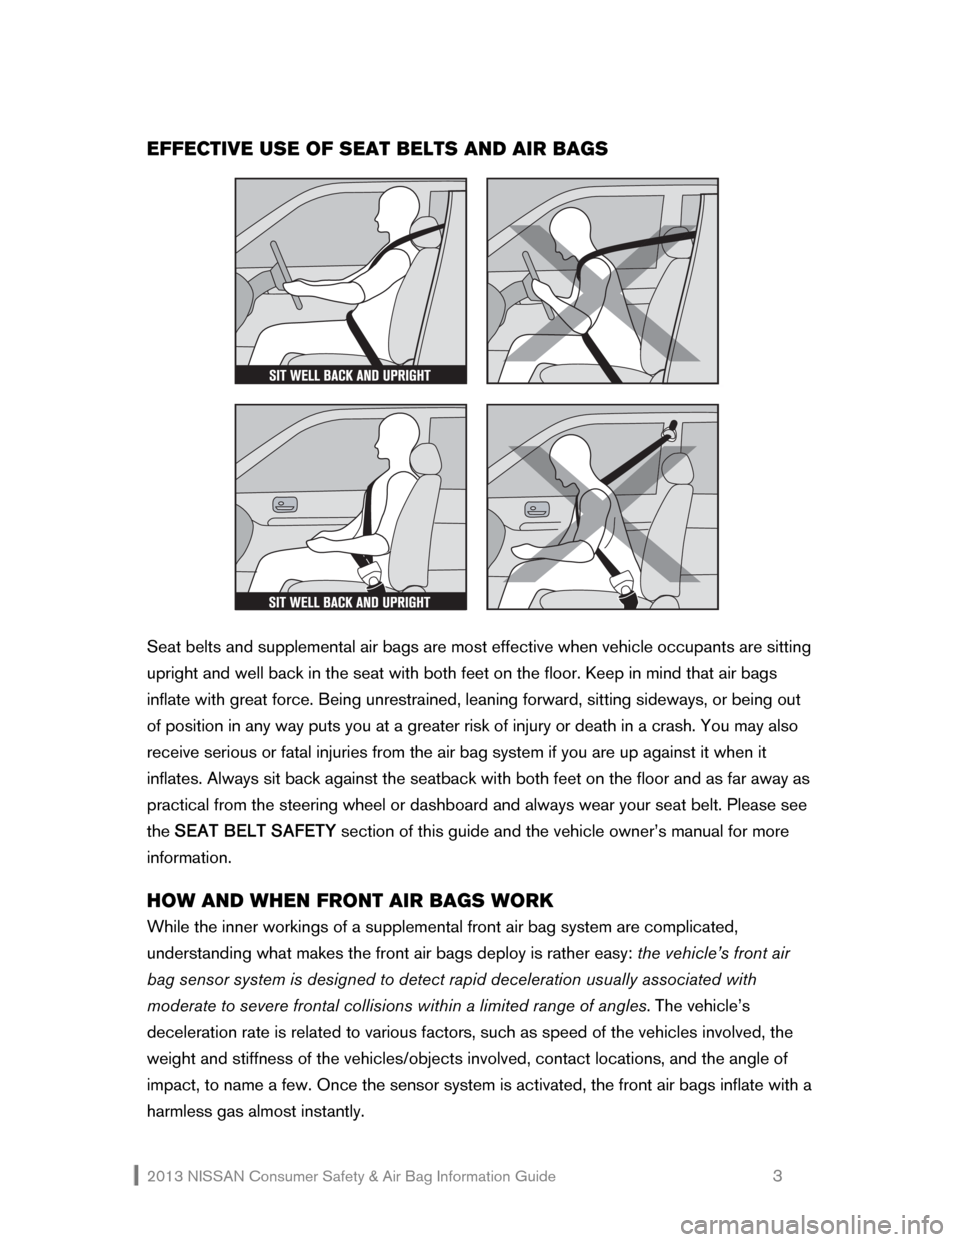 NISSAN GT-R 2013 R35 Consumer Safety Air Bag Information Guide 2013 NISSAN Consumer Safety & Air Bag Information Guide                                                   3 
EFFECTIVE USE OF SEAT BELTS AND AIR BAGS 
 
 
 
Seat belts and supplemental air bags are mo